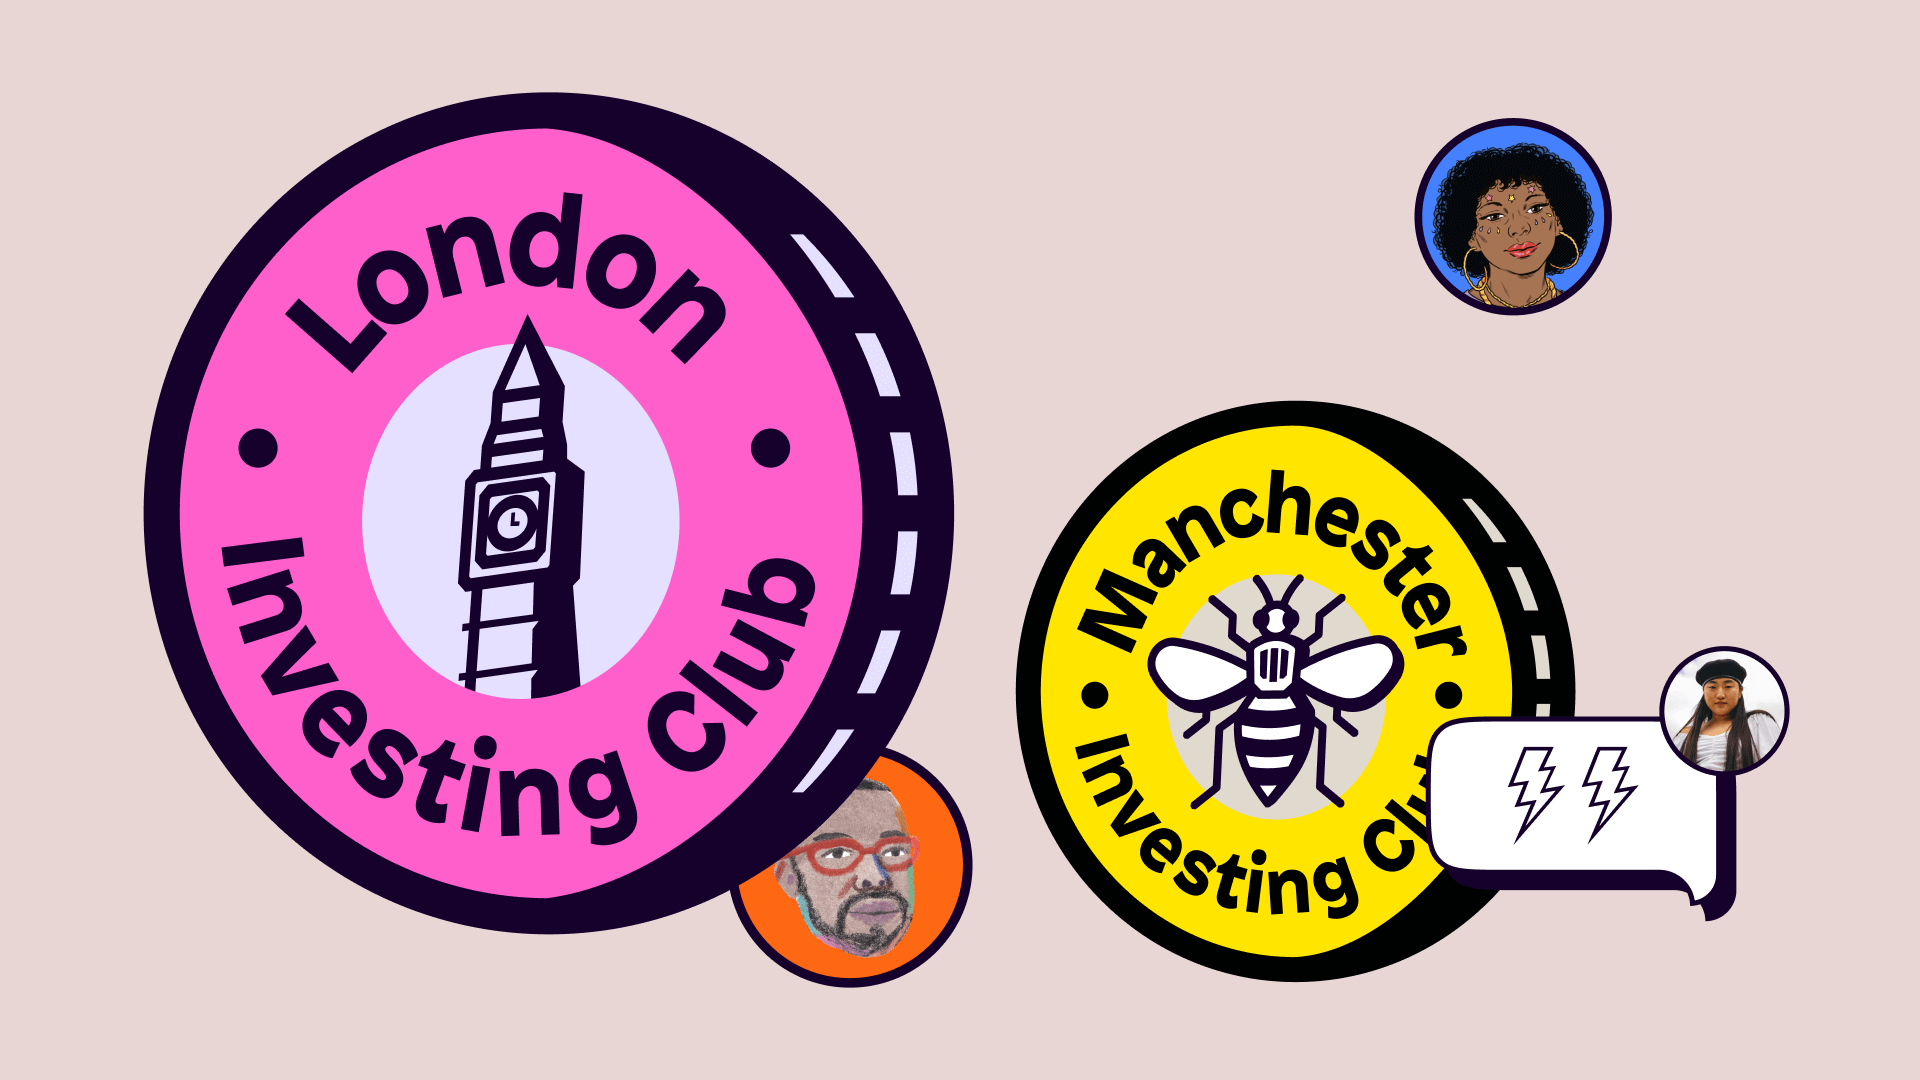 London and Manchester Shares investing club